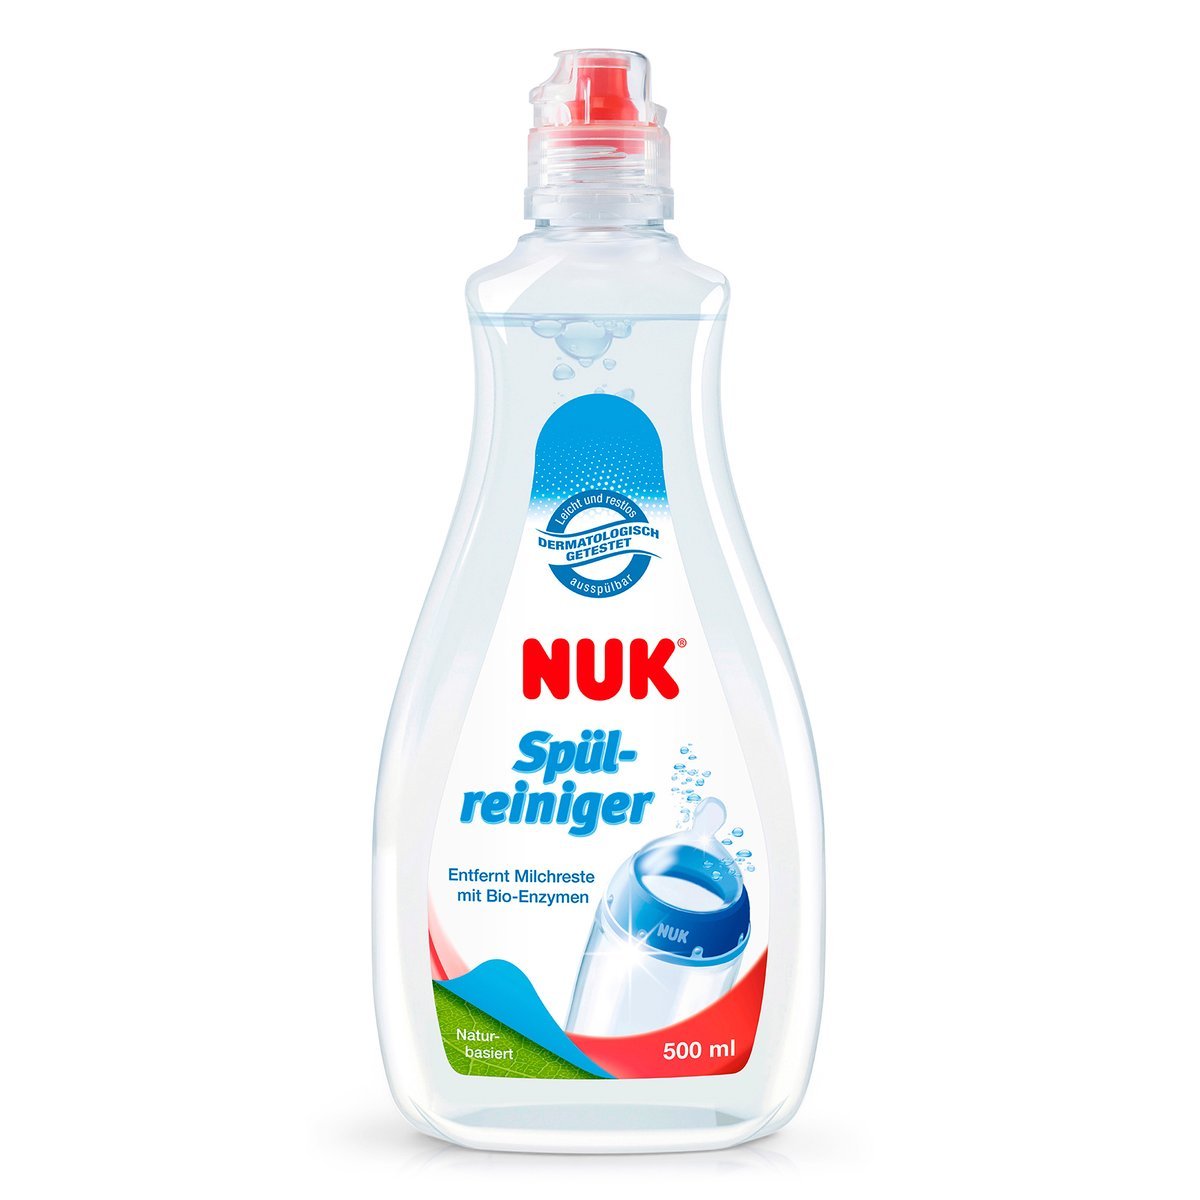 NUK detergent for baby bottles & suckers, 500 ml, with natural-based ingredients